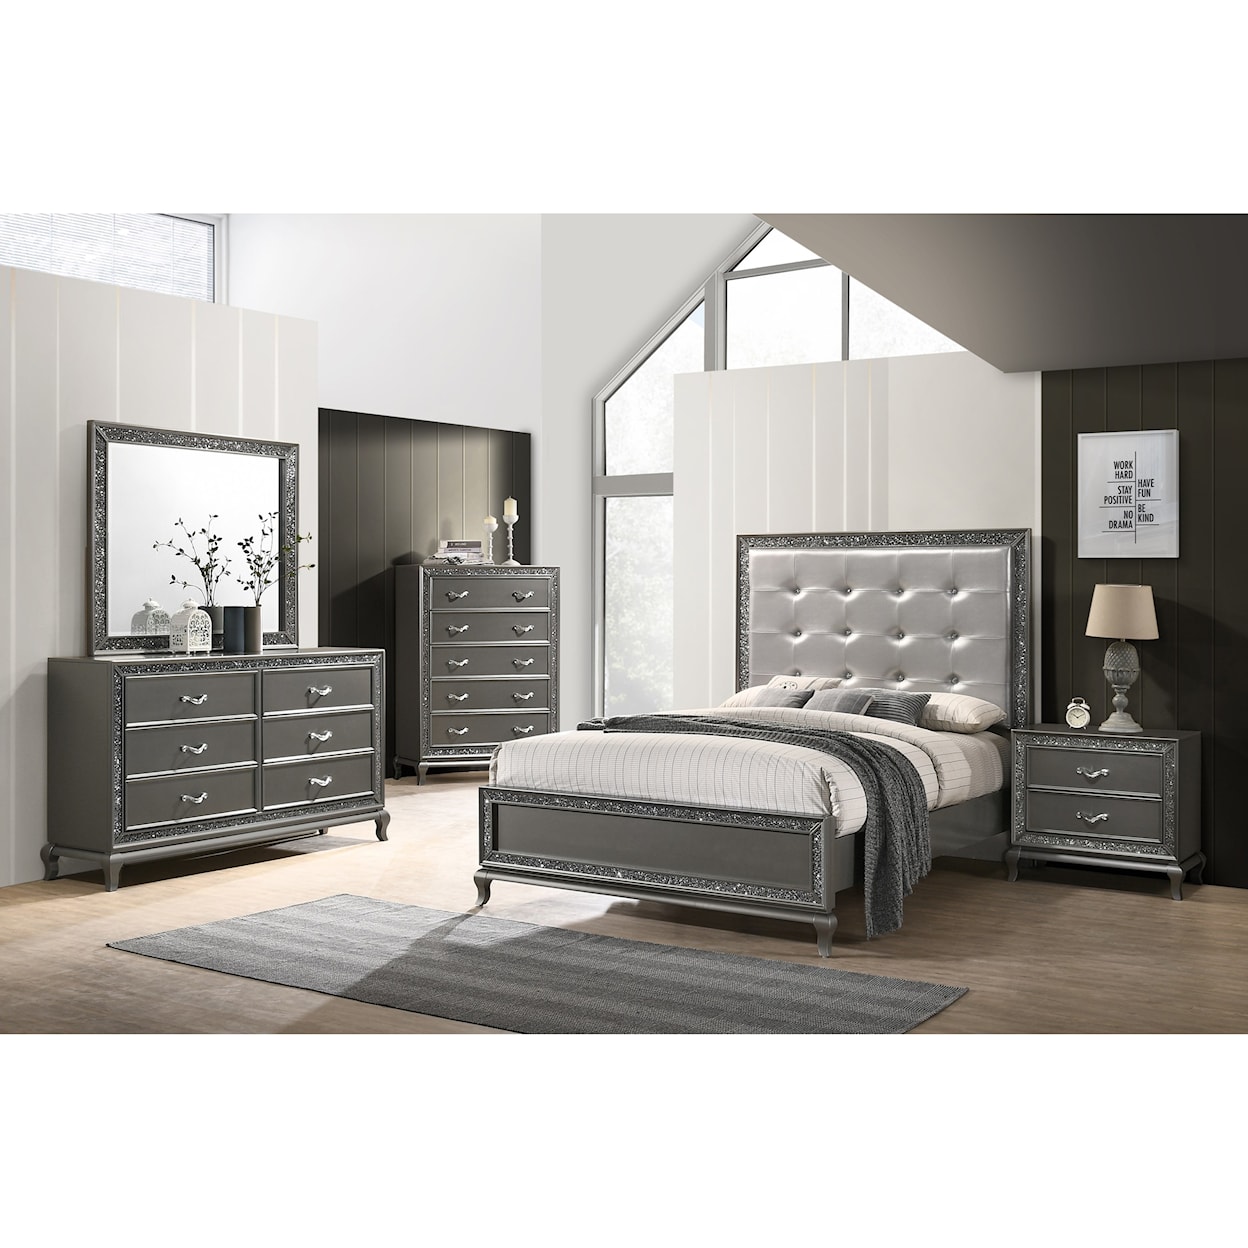 New Classic Furniture Park Imperial California King Bedroom Group